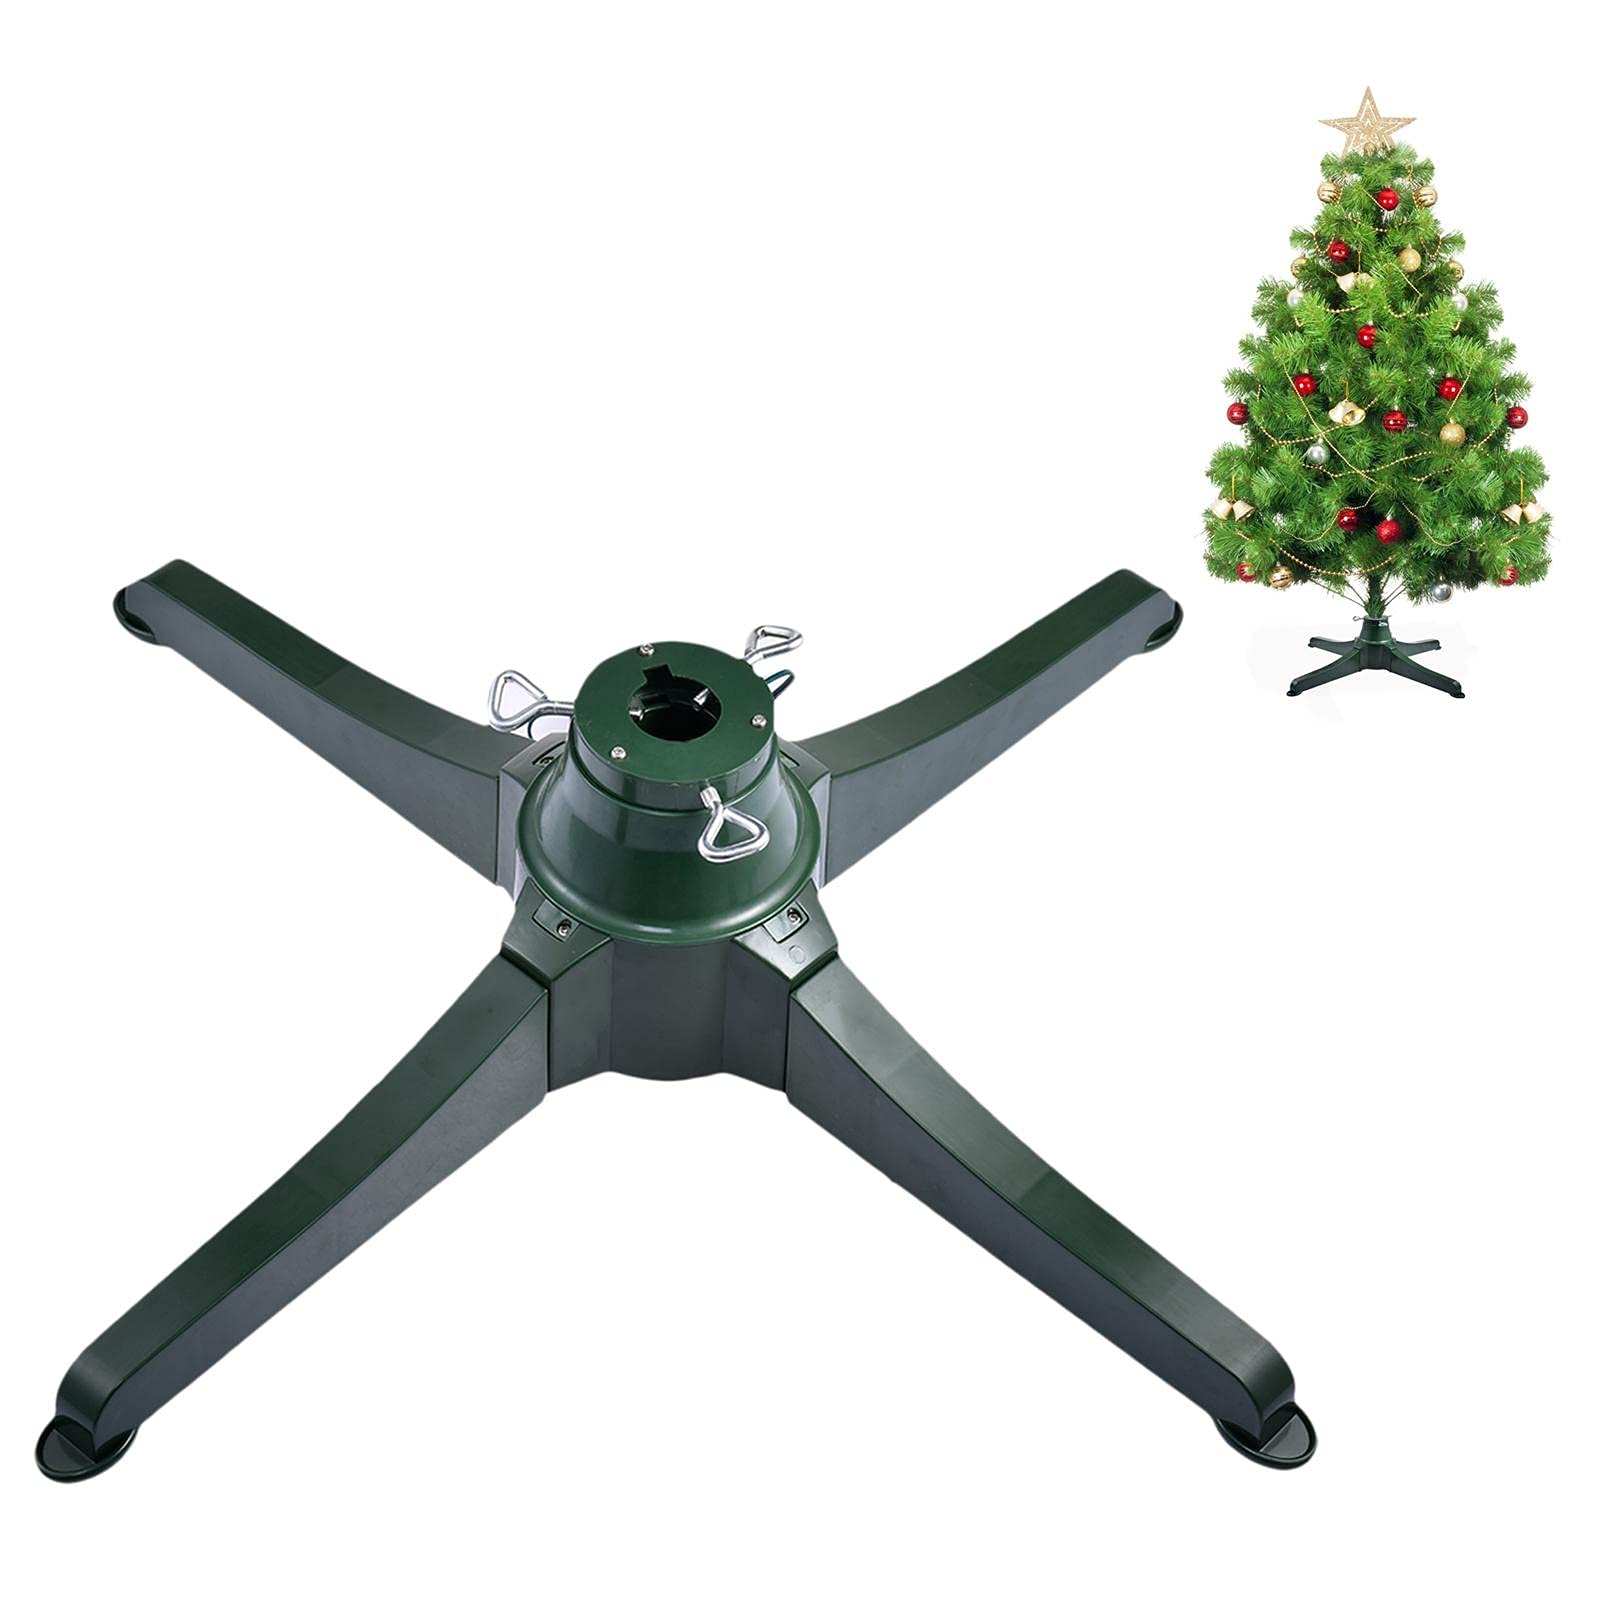 Where Can I Buy A Christmas Tree Stand?